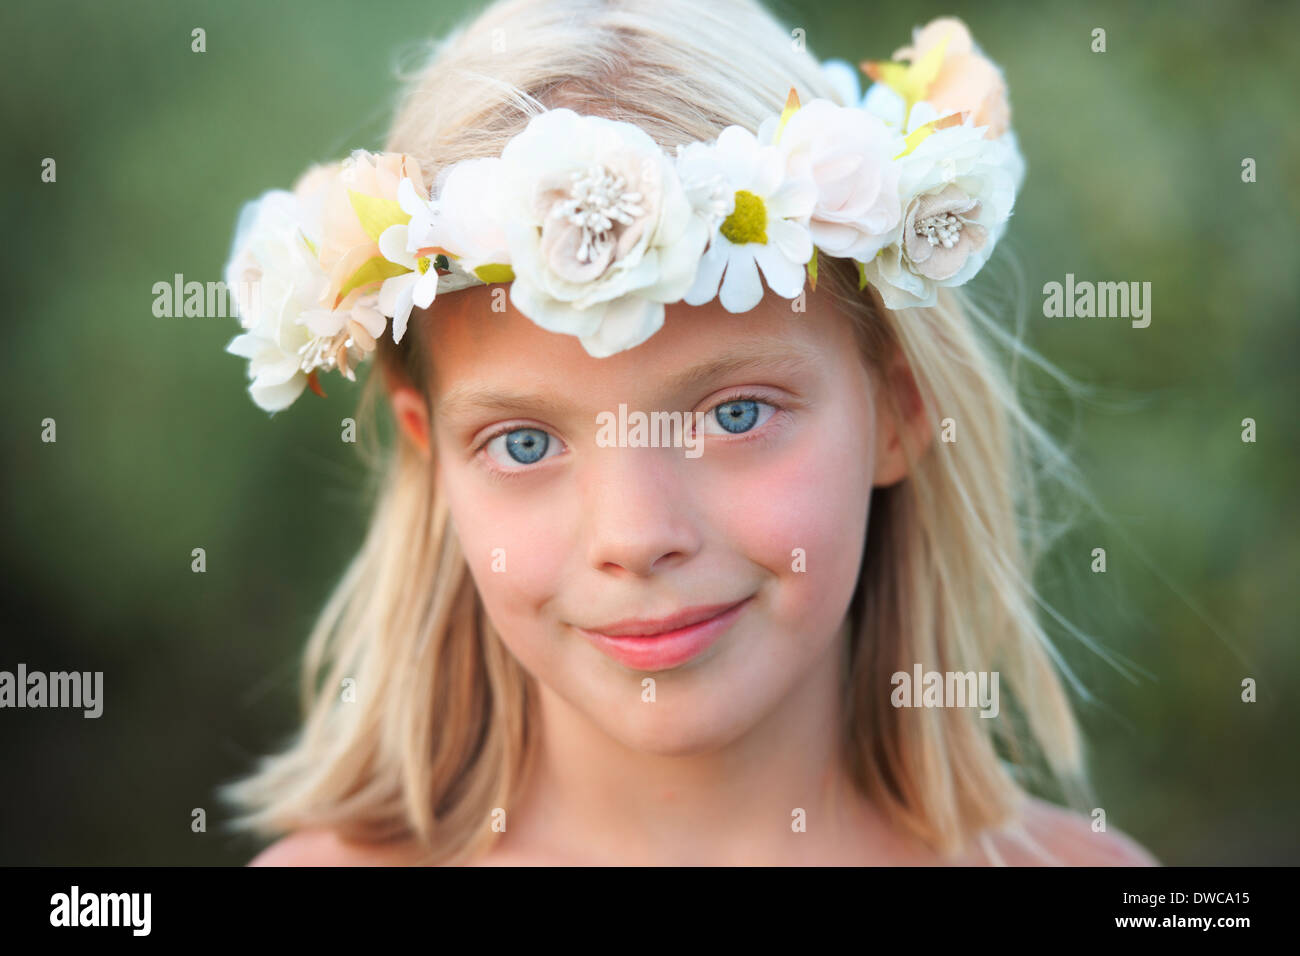 Portrait of girl with flower garland in her hair Stock Photo